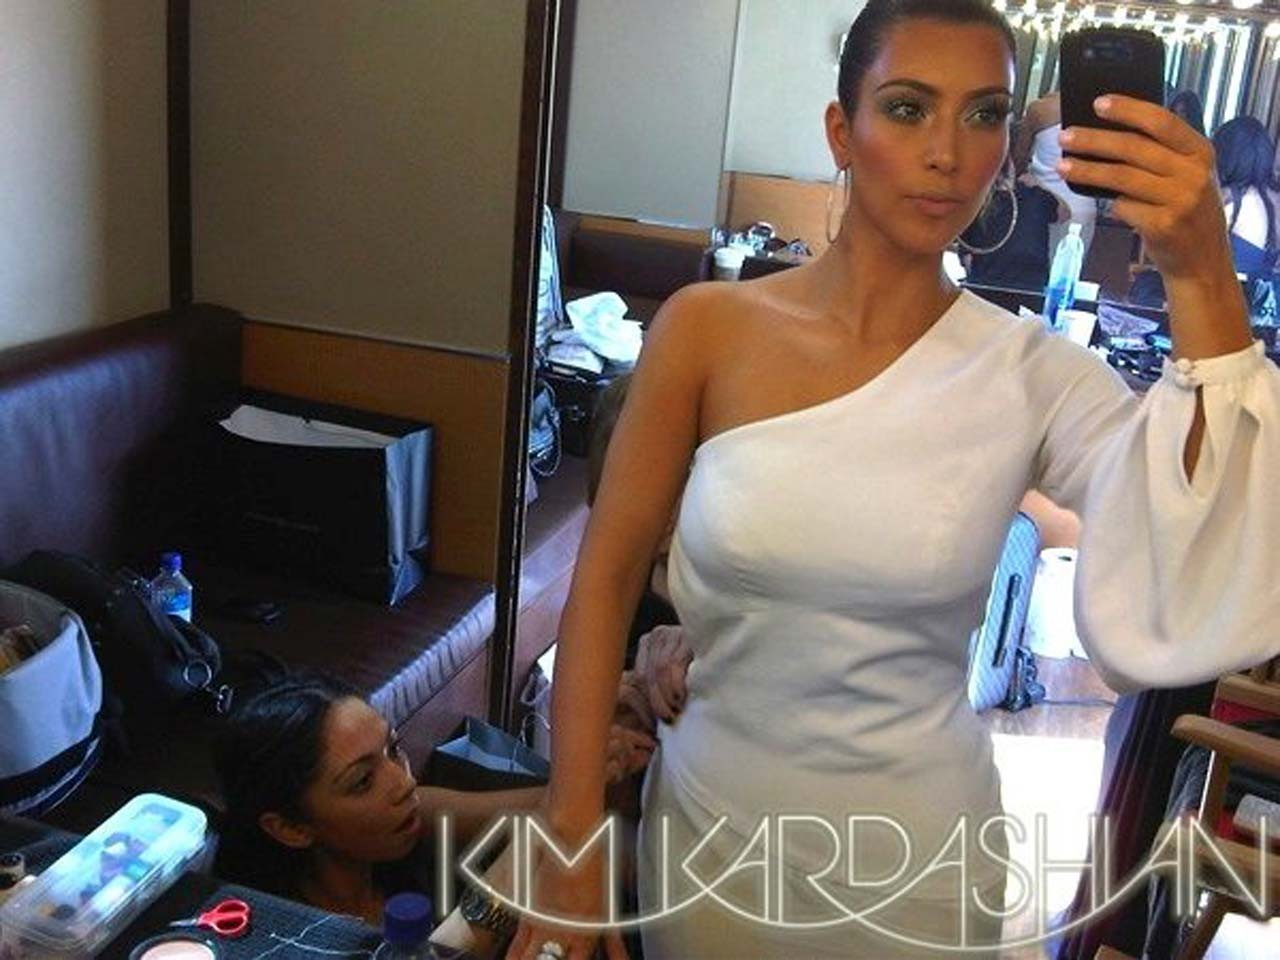 Kim Kardashian looking very hot and sexy on her private photos #75303195